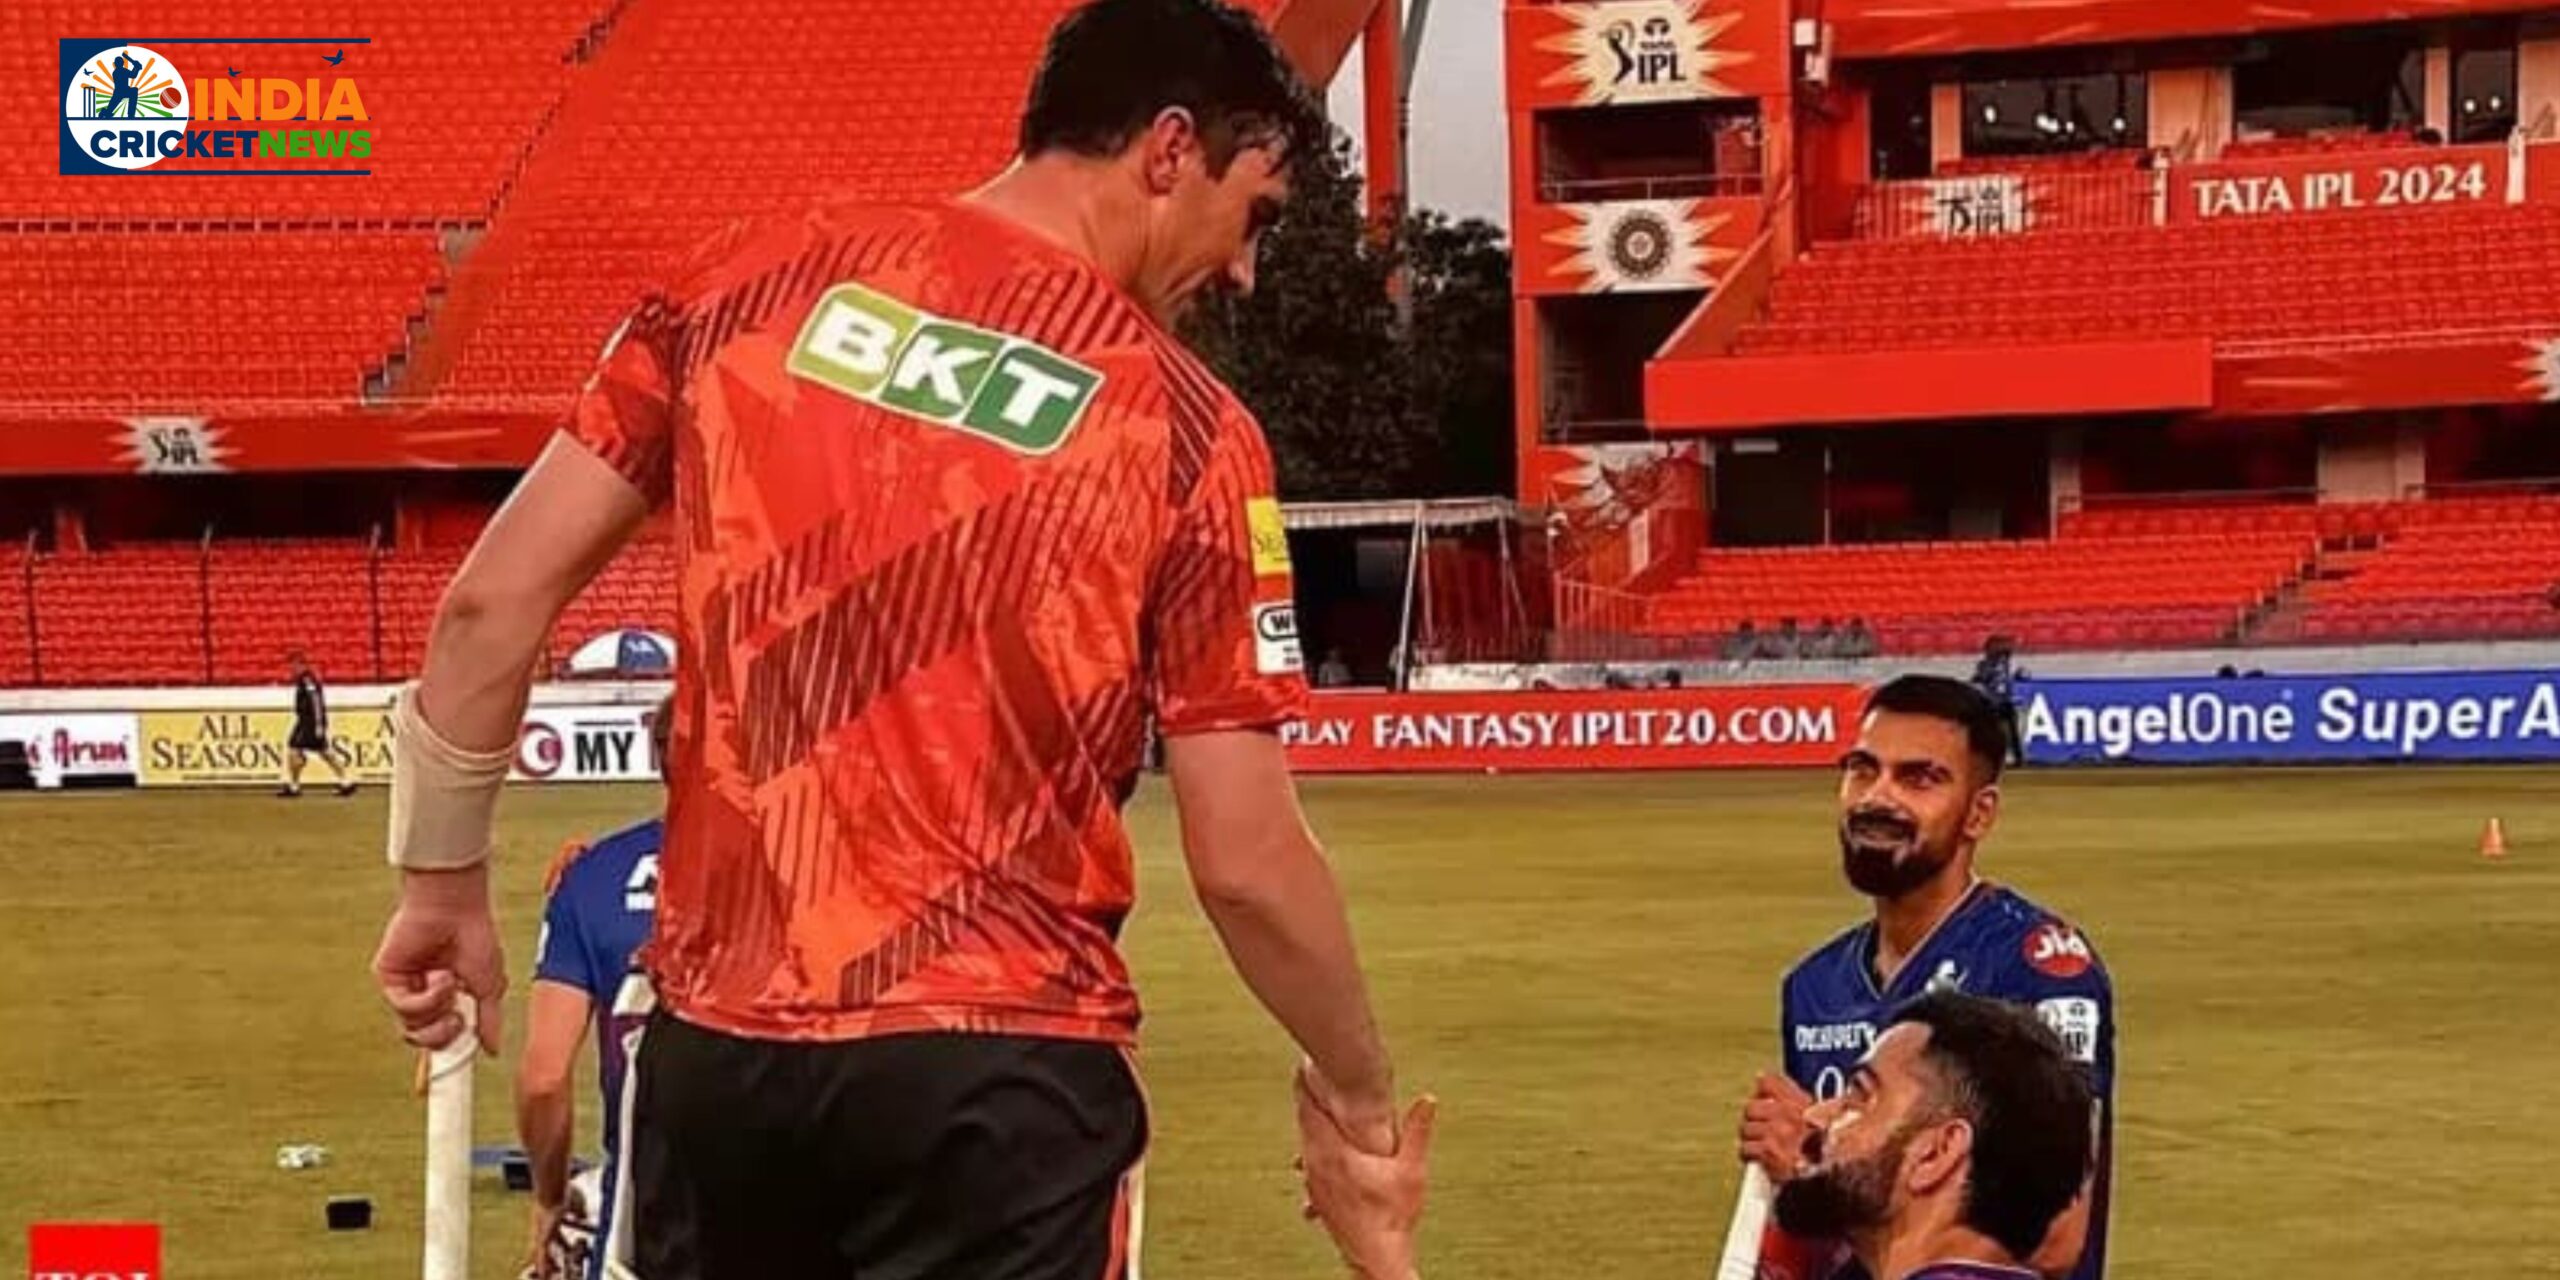 Before SRH-RCB, Virat Kohli and Pat Cummins stoke rivalry with an engrossing conversation. "Heard you said I made wicket look flat."